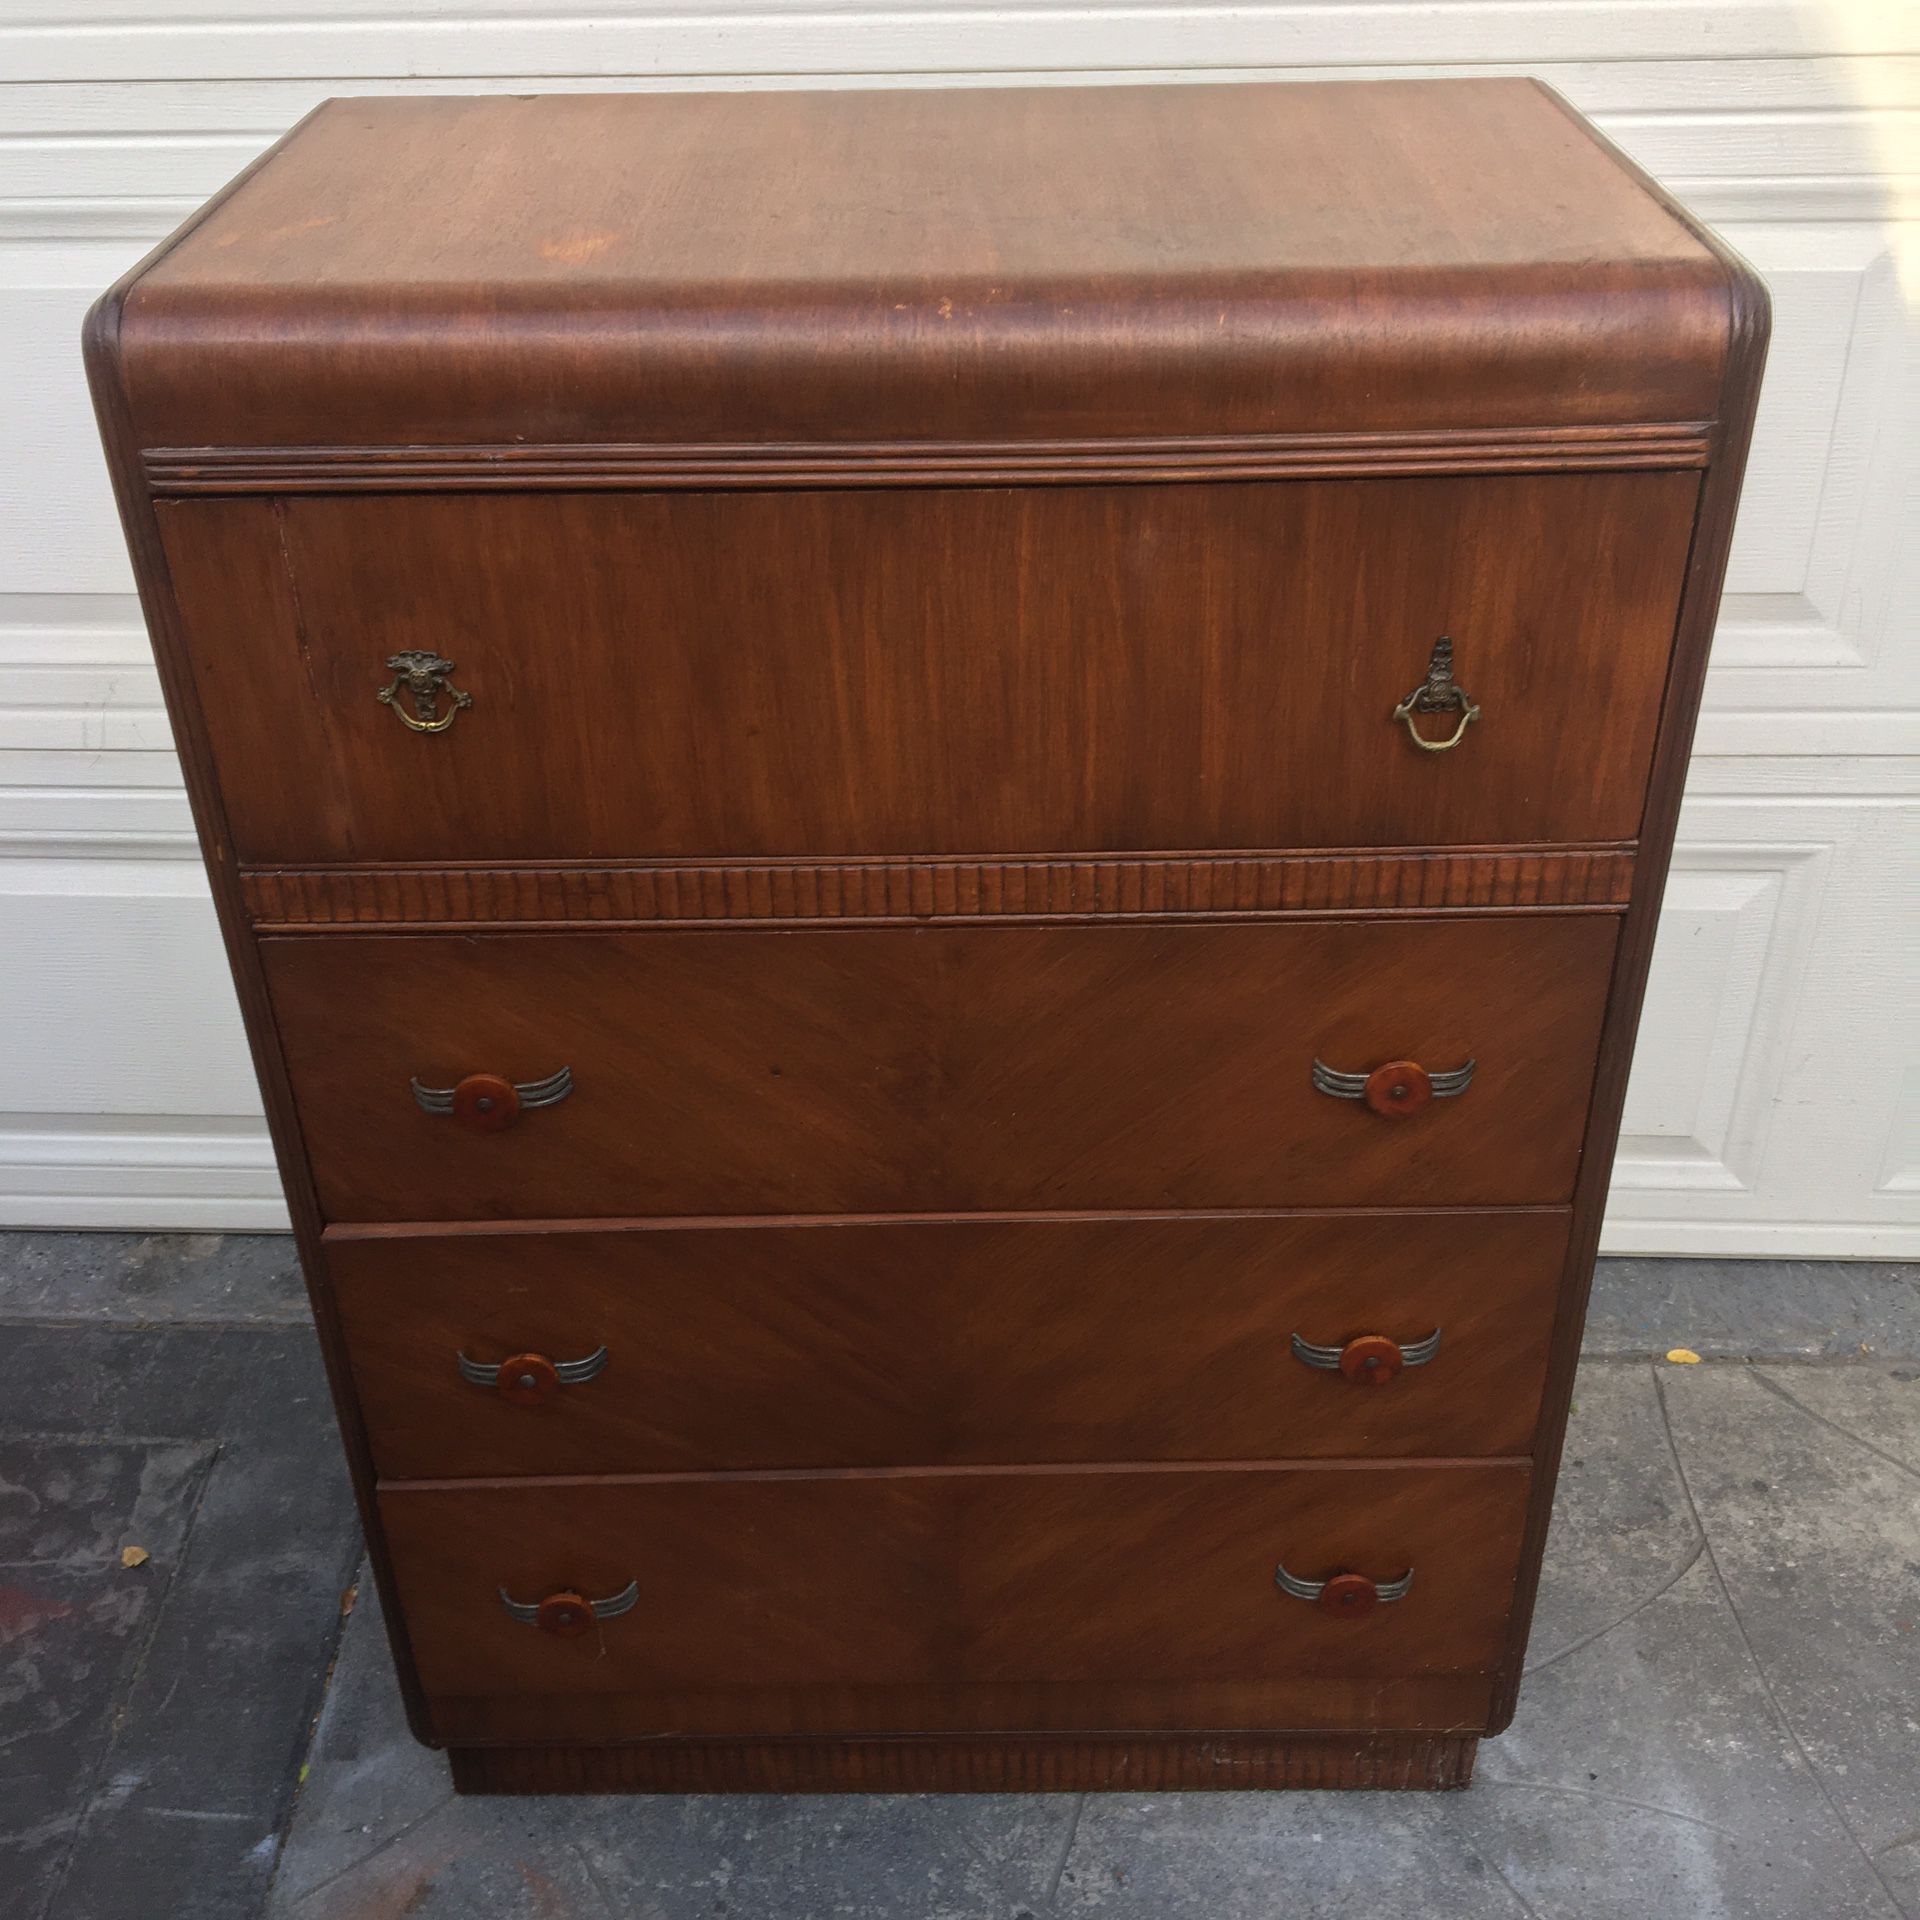 Beautifully crafted antique/vintage art deco solid wood 4-drawer dresser. Measurements 31 x 18 1/2 x 43.